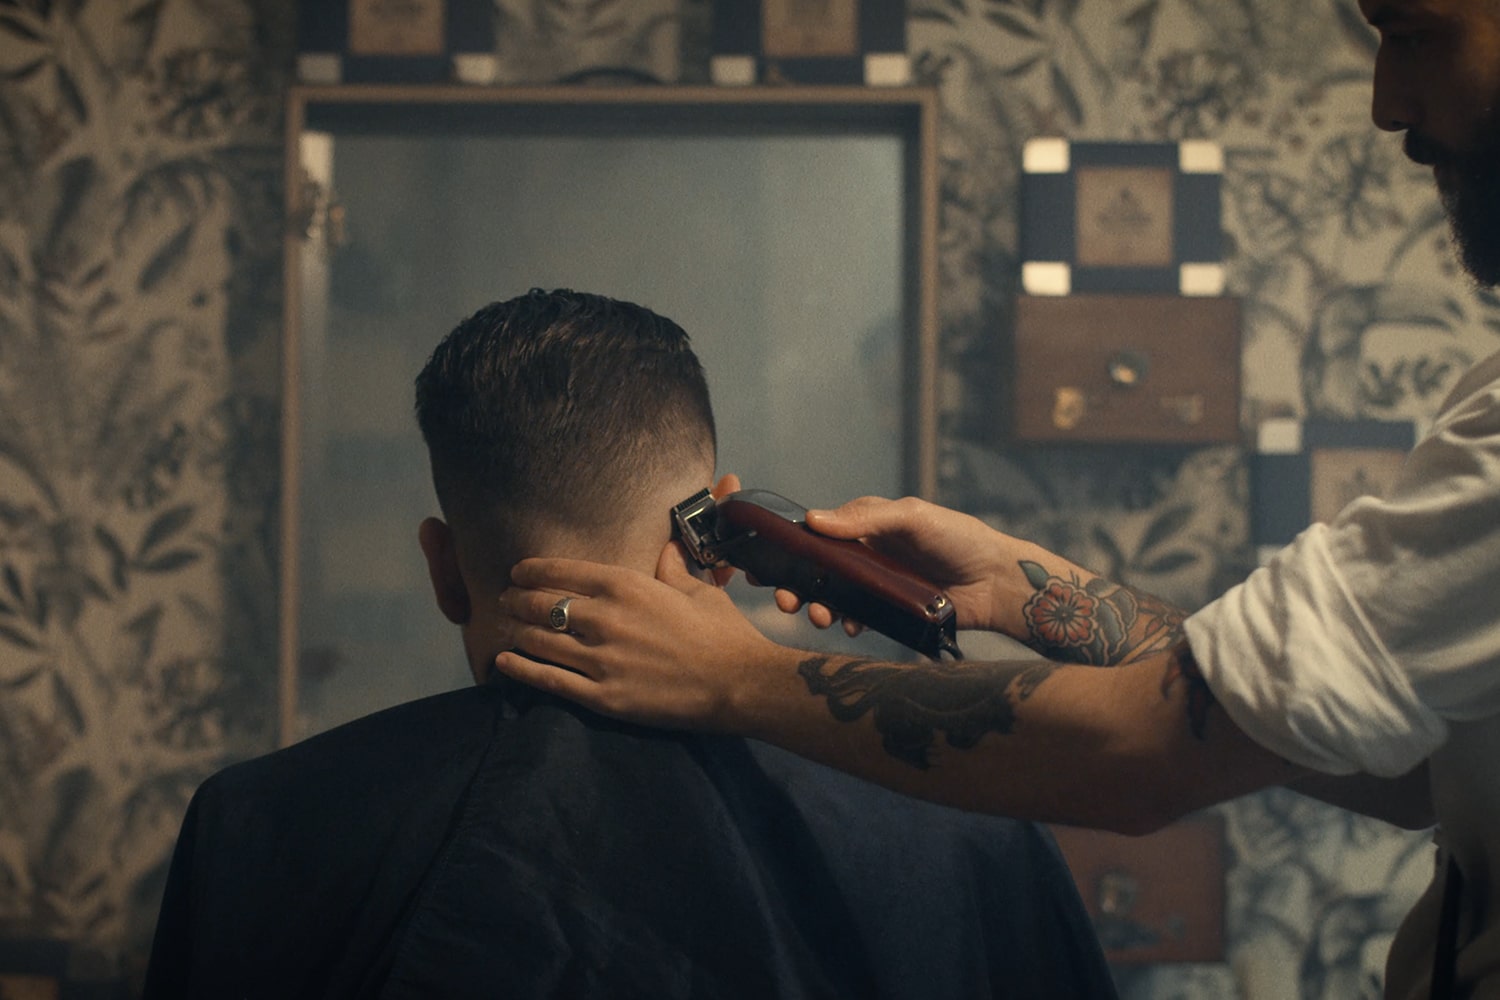 The haircut you should get (by order of the Peaky Blinders) - Treatwell